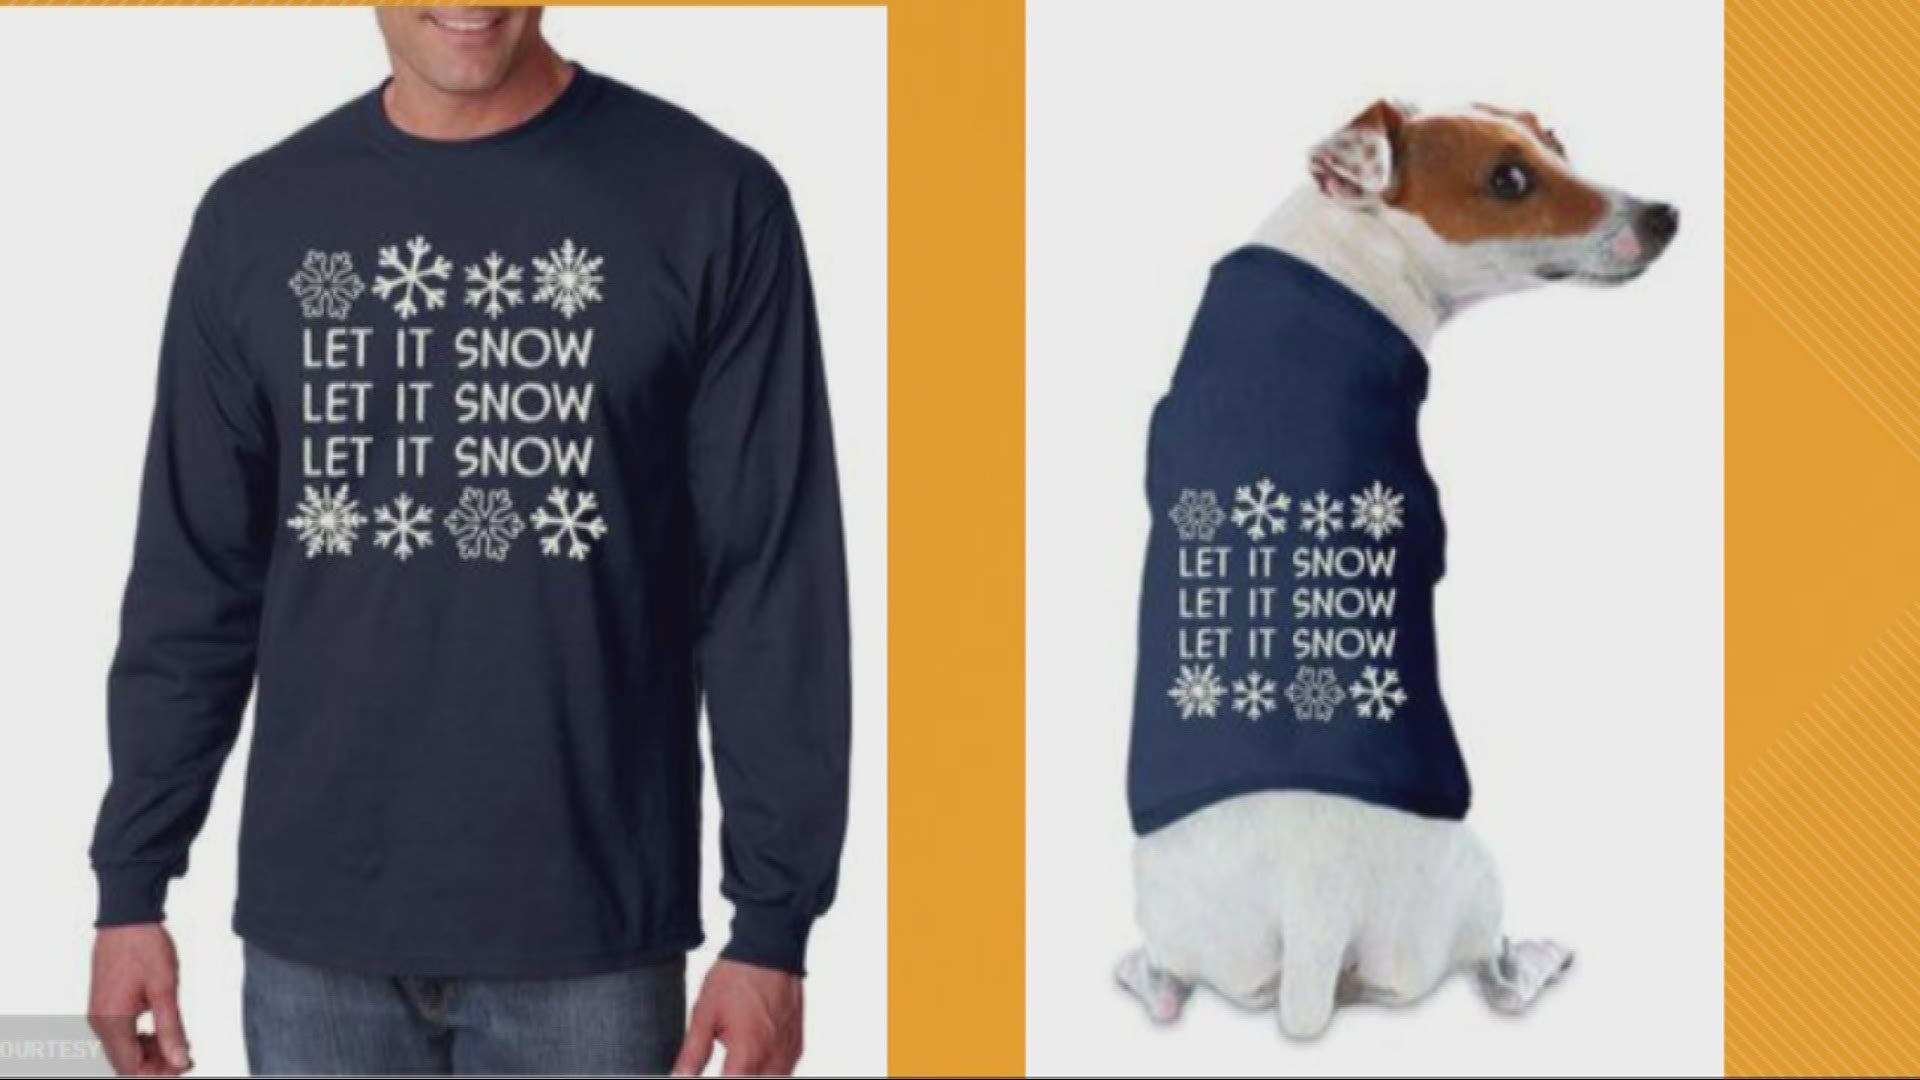 If you need an idea for your holiday card, how about a matching sweater for your dog?